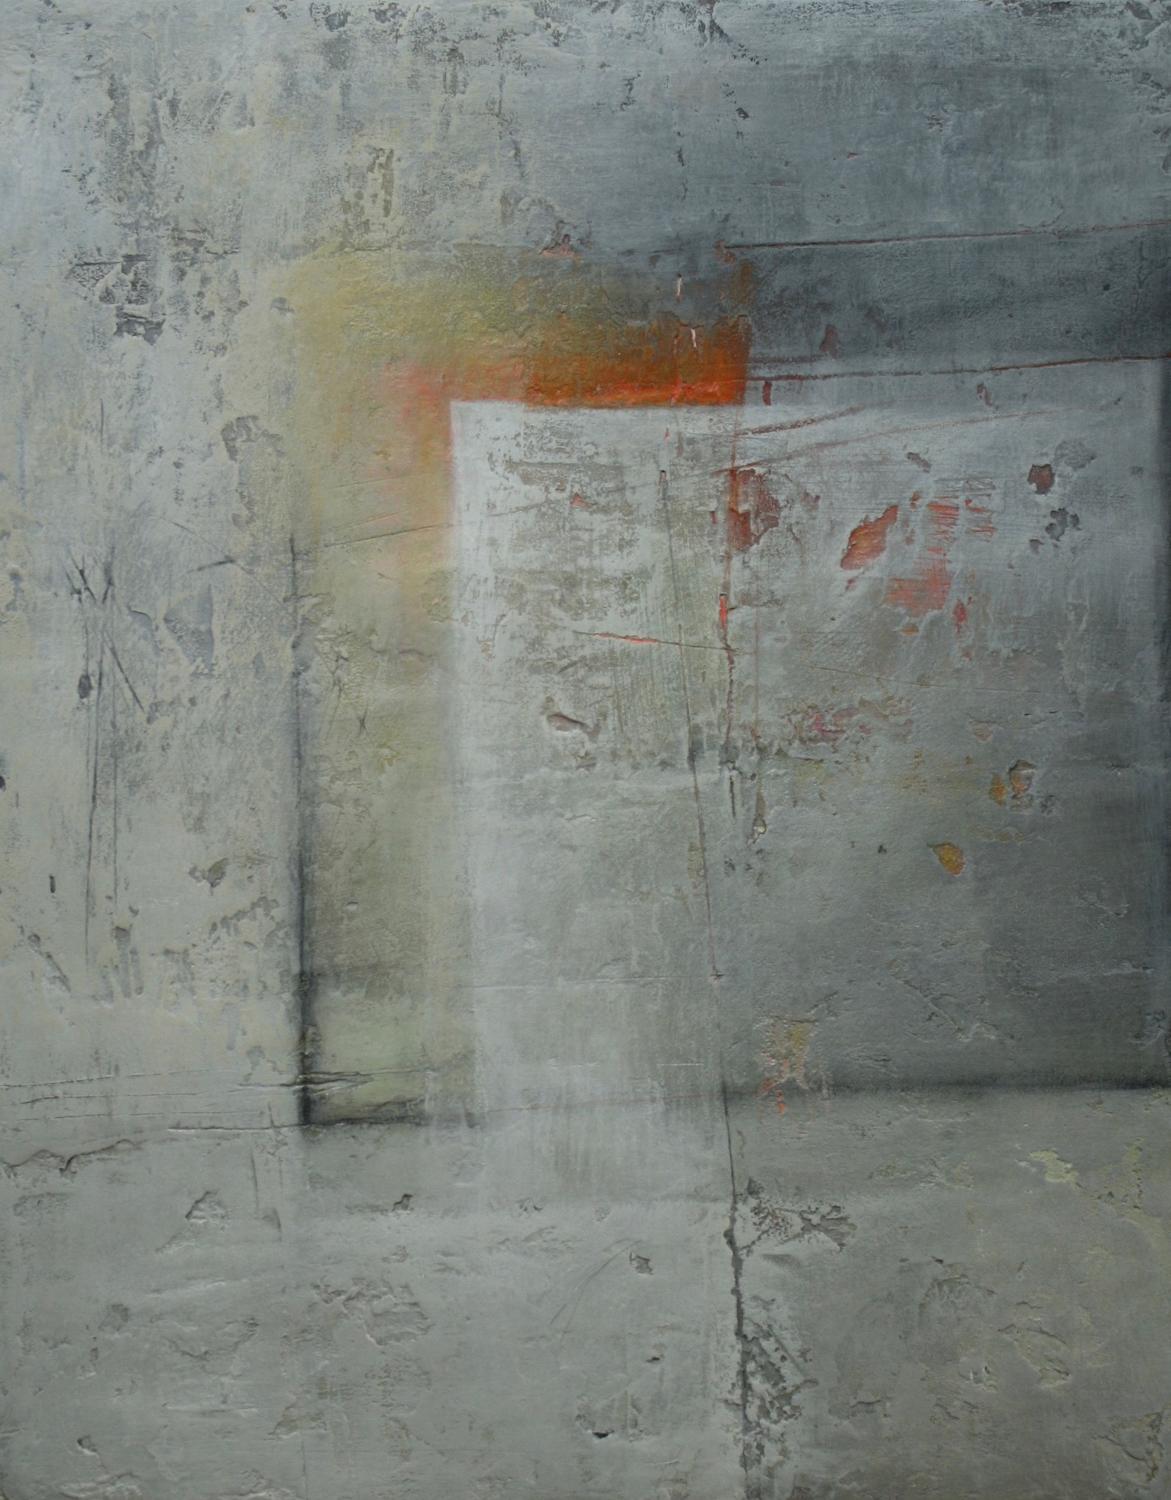 Michele Griffiths. Square into rectangle goes orange.